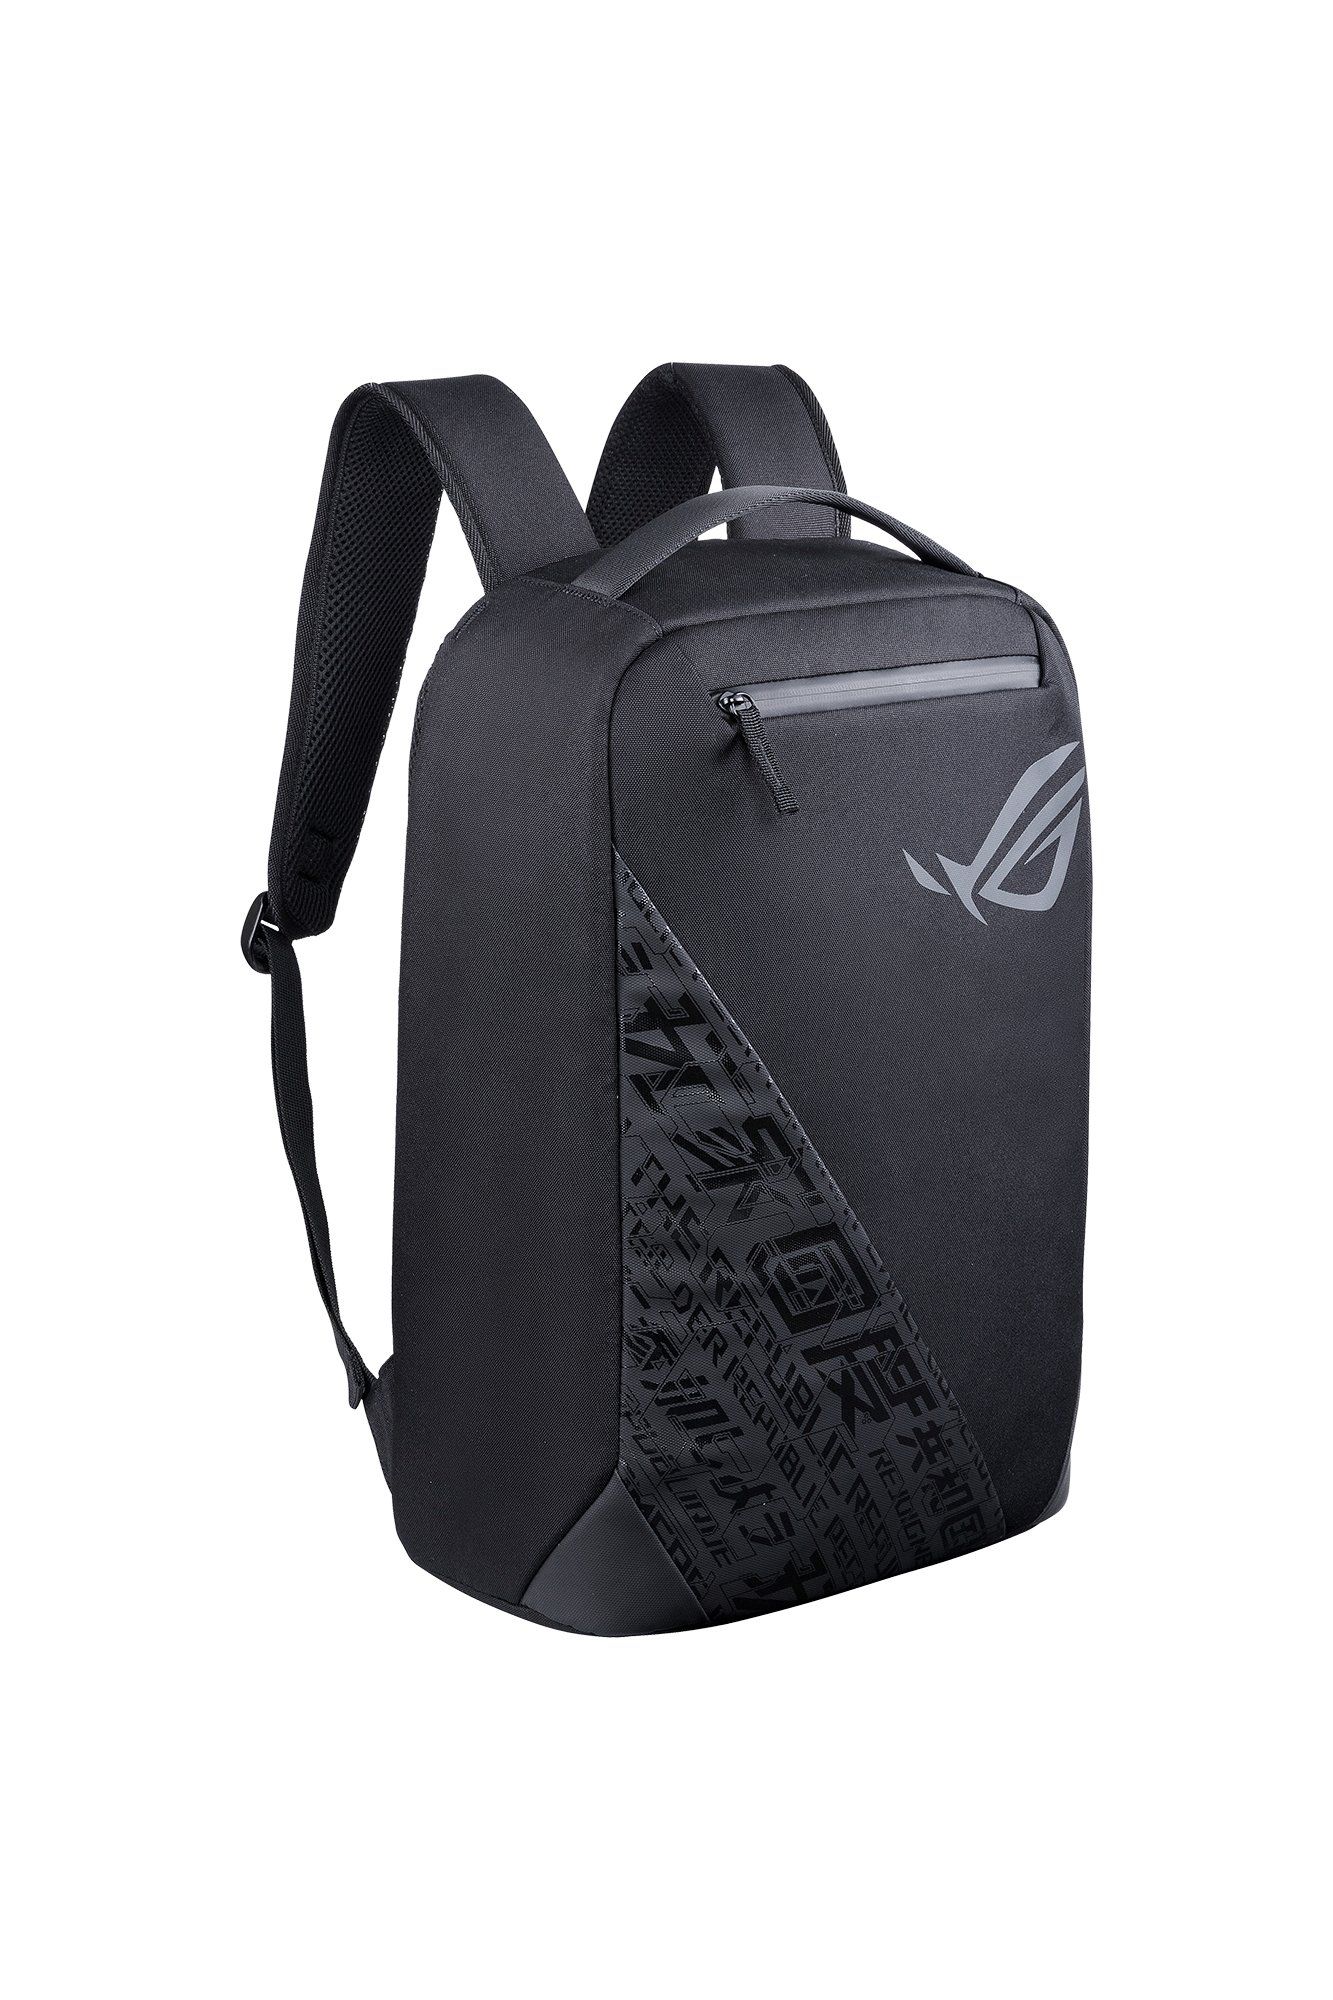 ASUS ROG BackPack BP1501G up to 17inch NB Comp 399x293x26.5mm 2Y Black_3